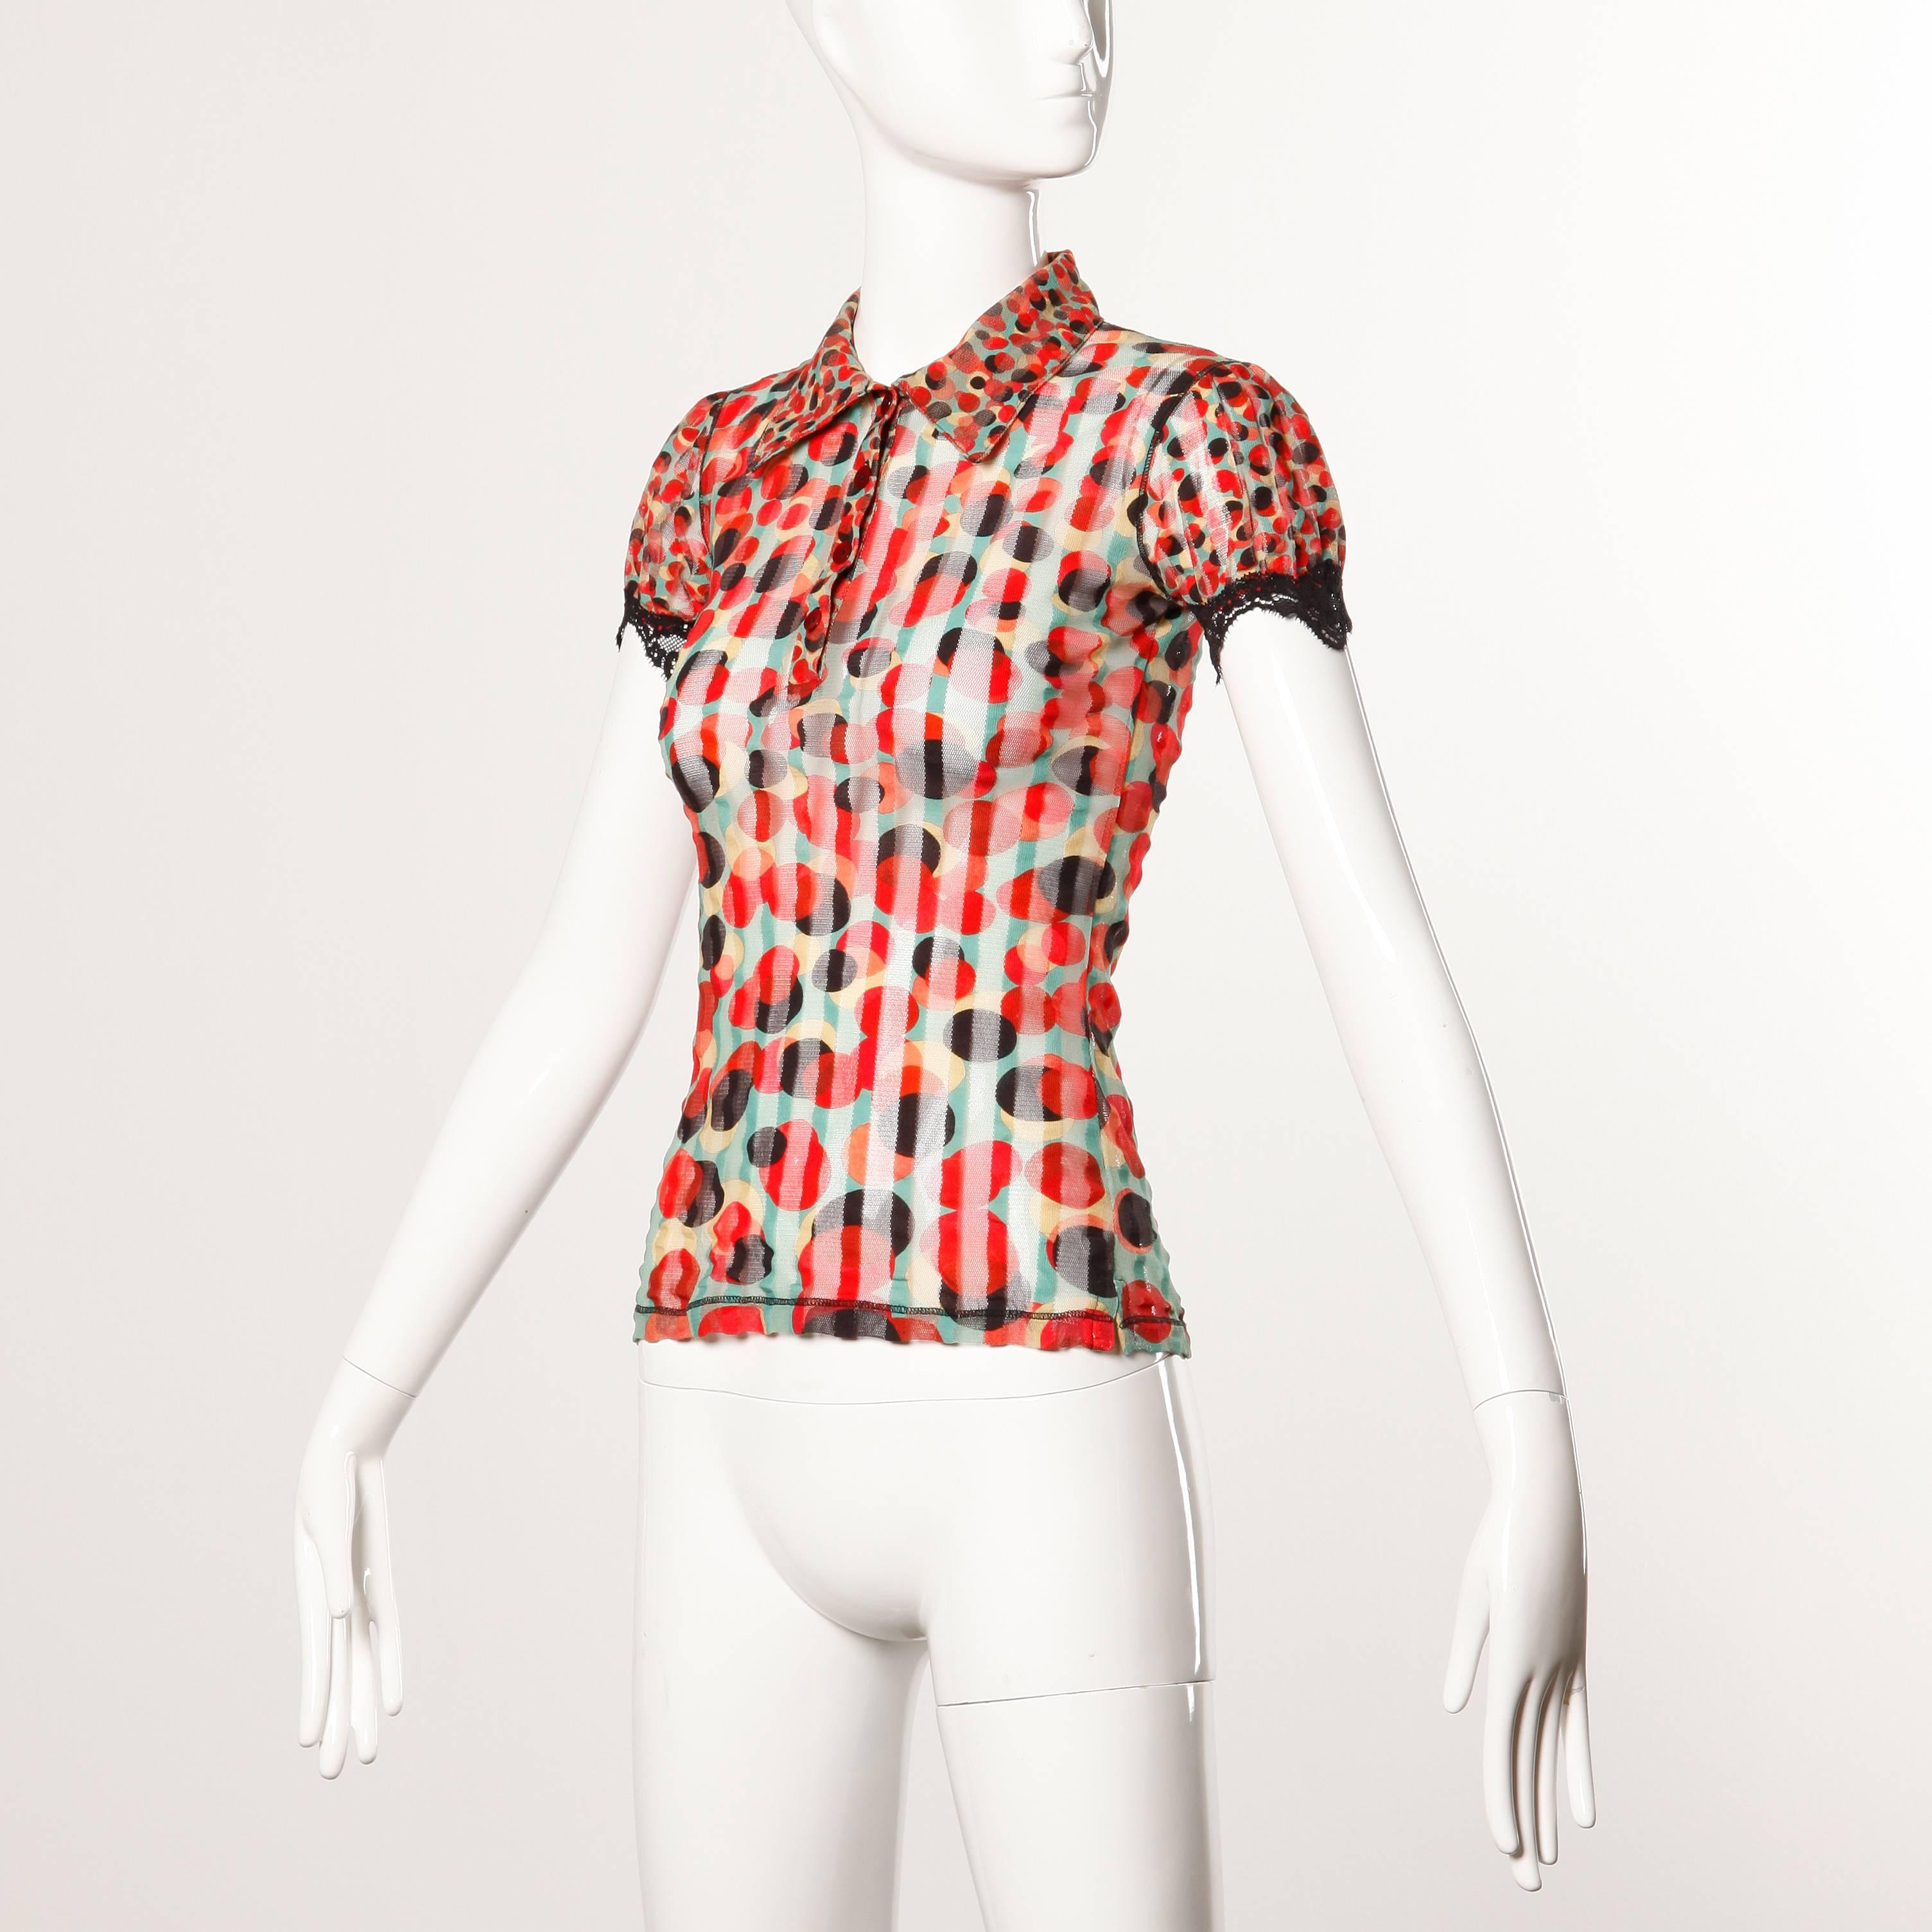 Vintage sheer mesh short sleeved top with lace trim and an op art polka dot print by Jean Paul Gaultier.

Details: 

Unlined
Front Button Closure
Marked Size: S
Color: Blue-Green/ Red/ Black/ Gold
Fabric: 100% Nylon
Label: Jean Paul